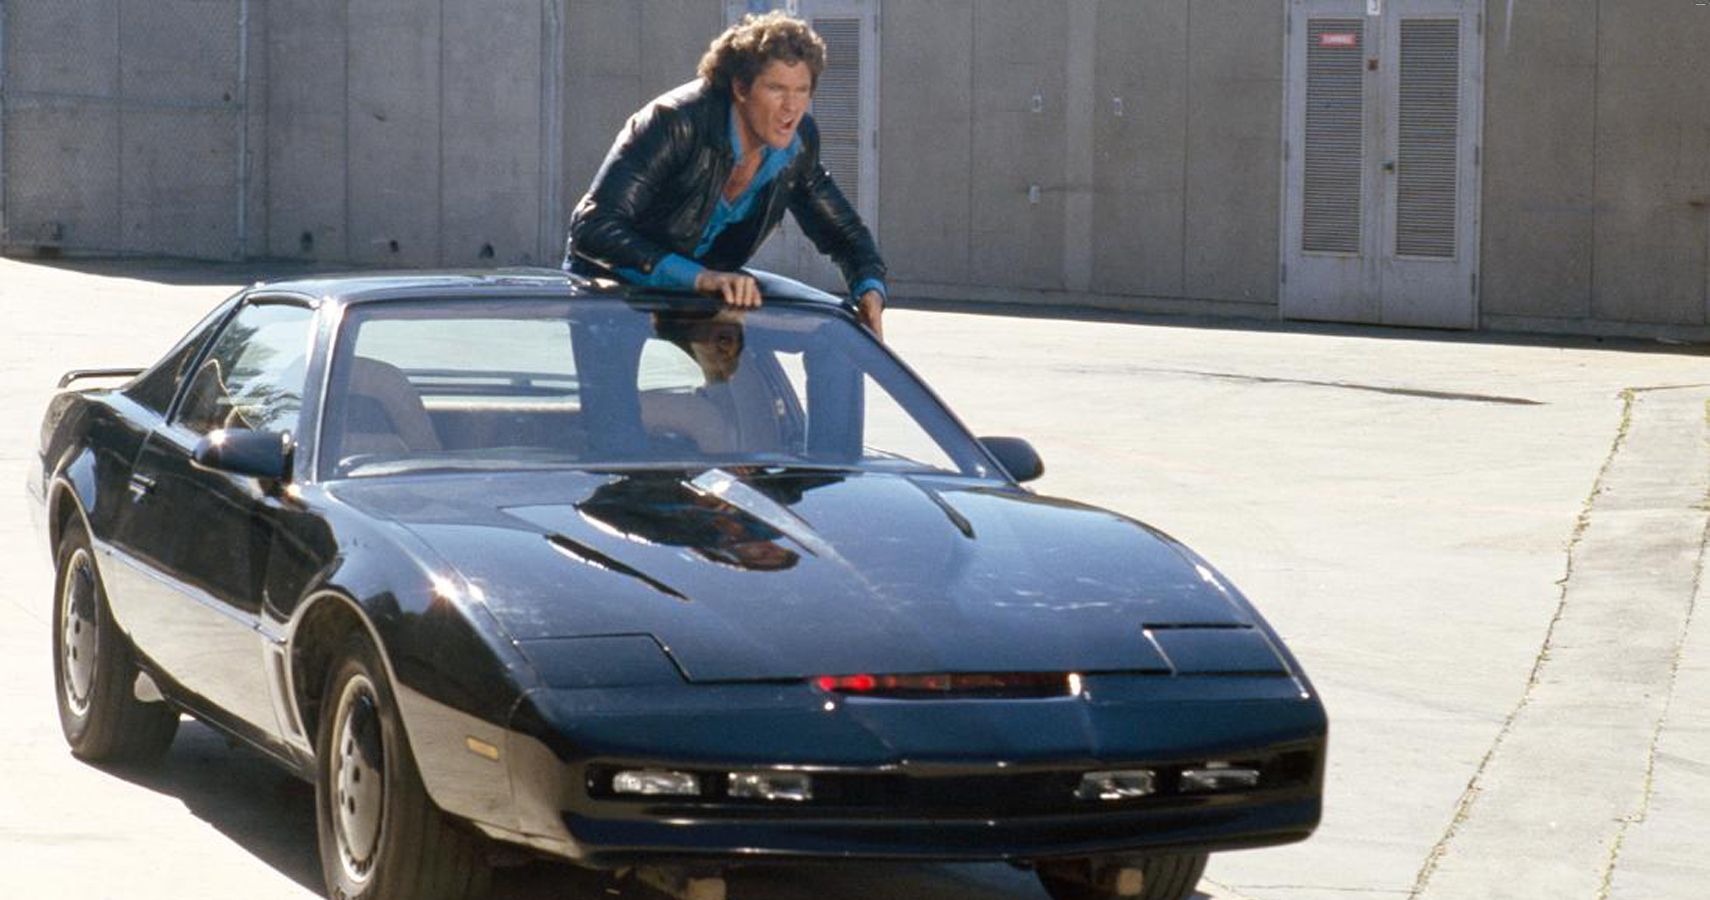 9 Surprising Facts About K.I.T.T. From Knight Rider